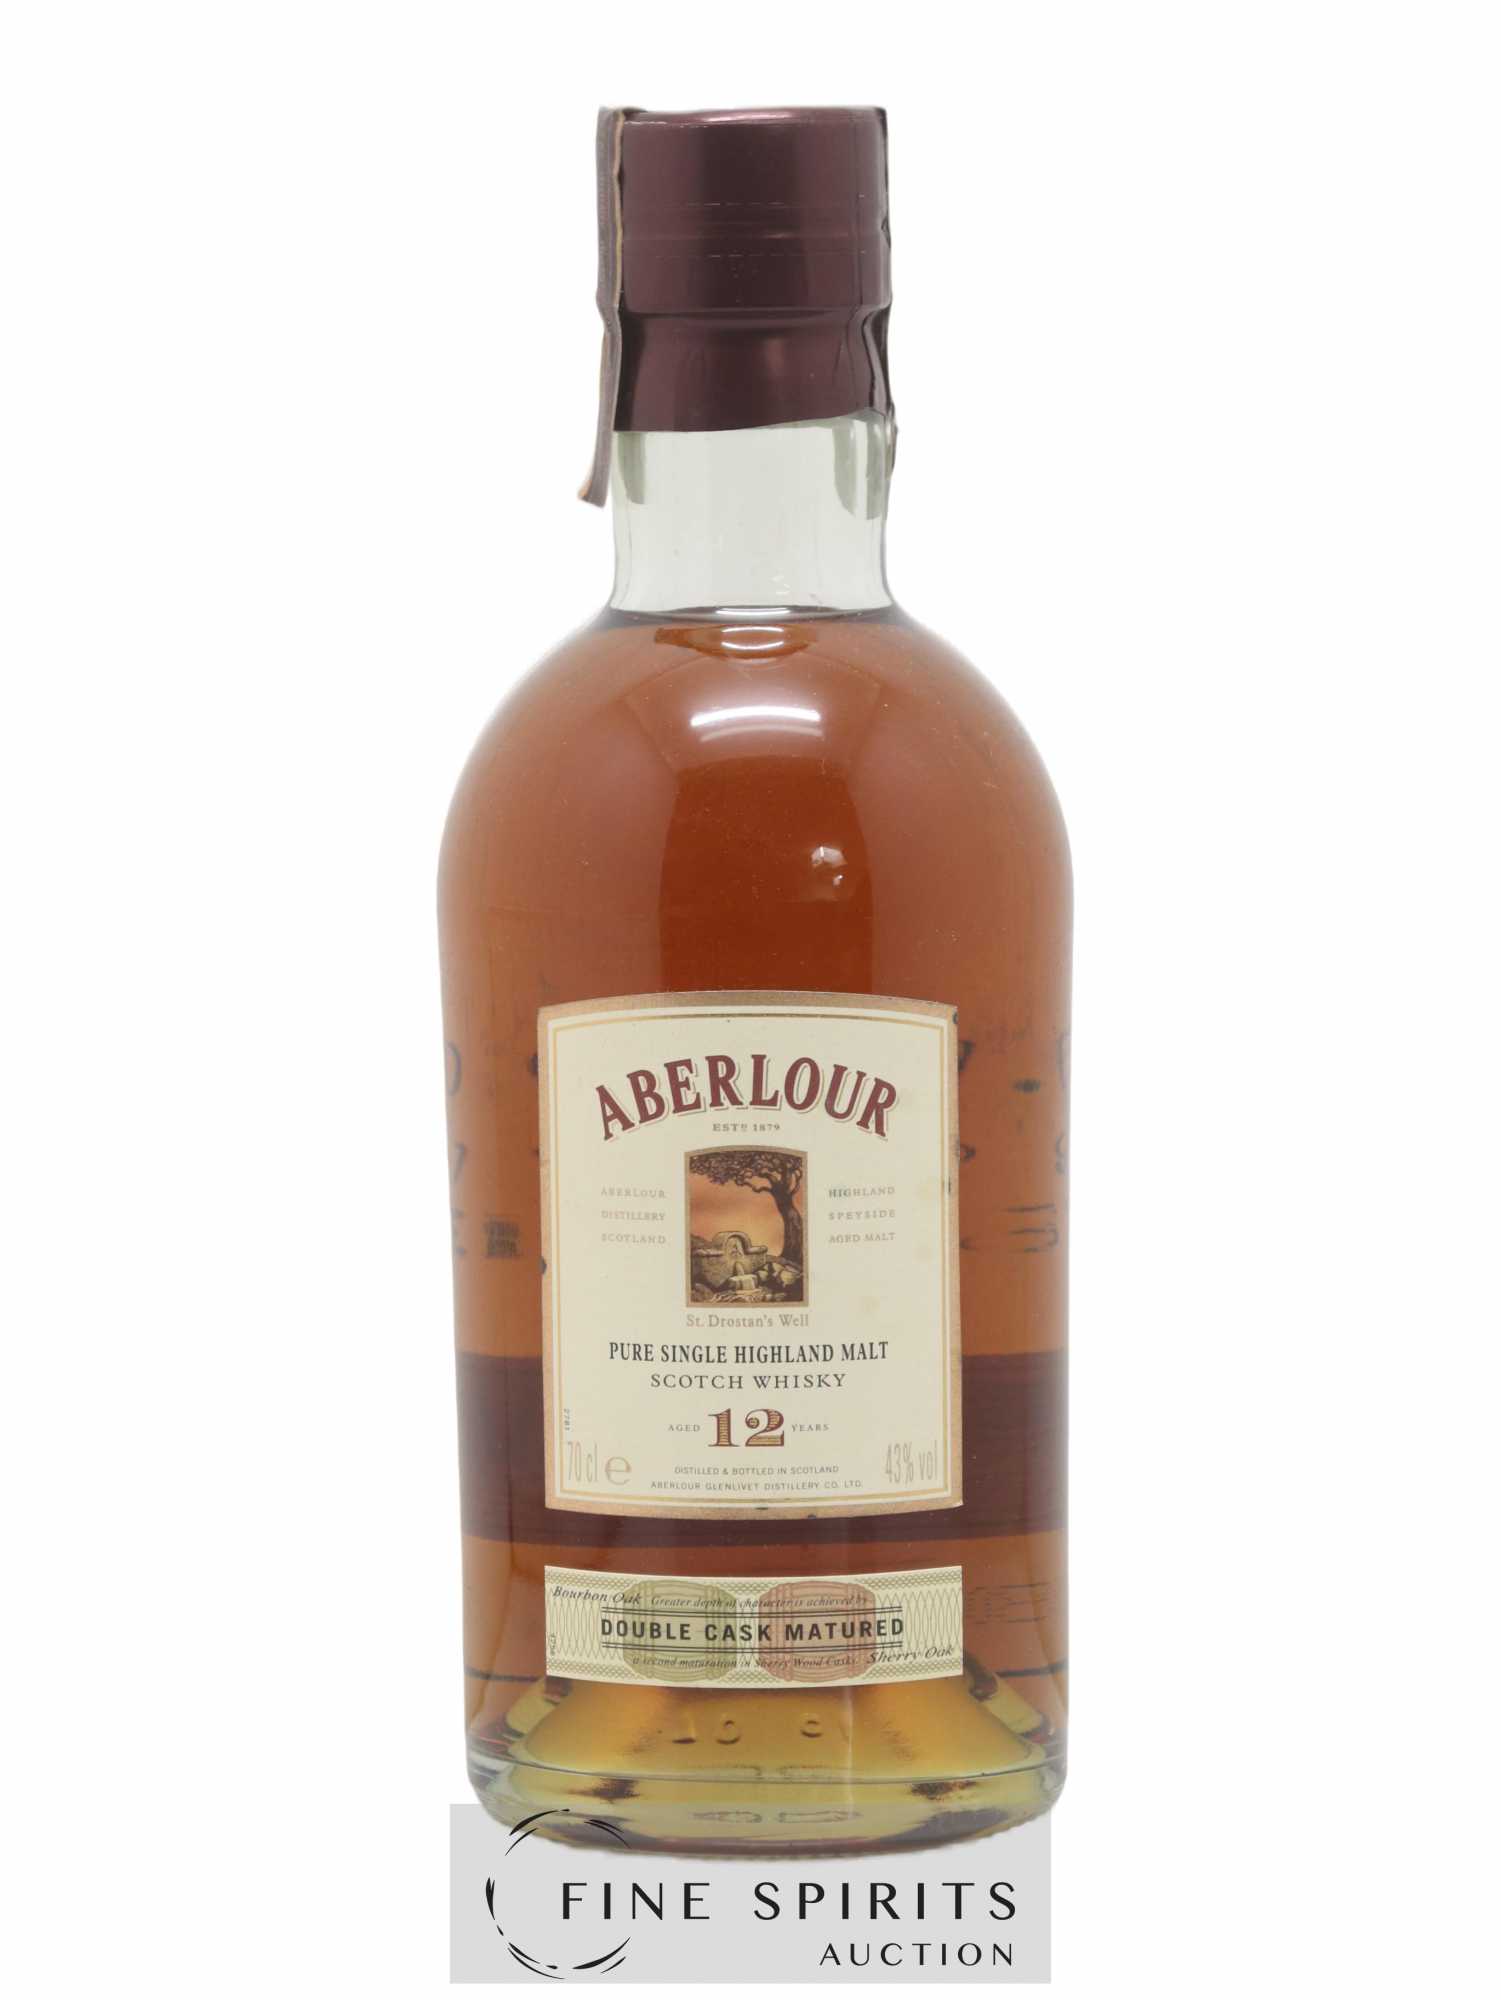 Aberlour 12 years Of. Double Cask Matured